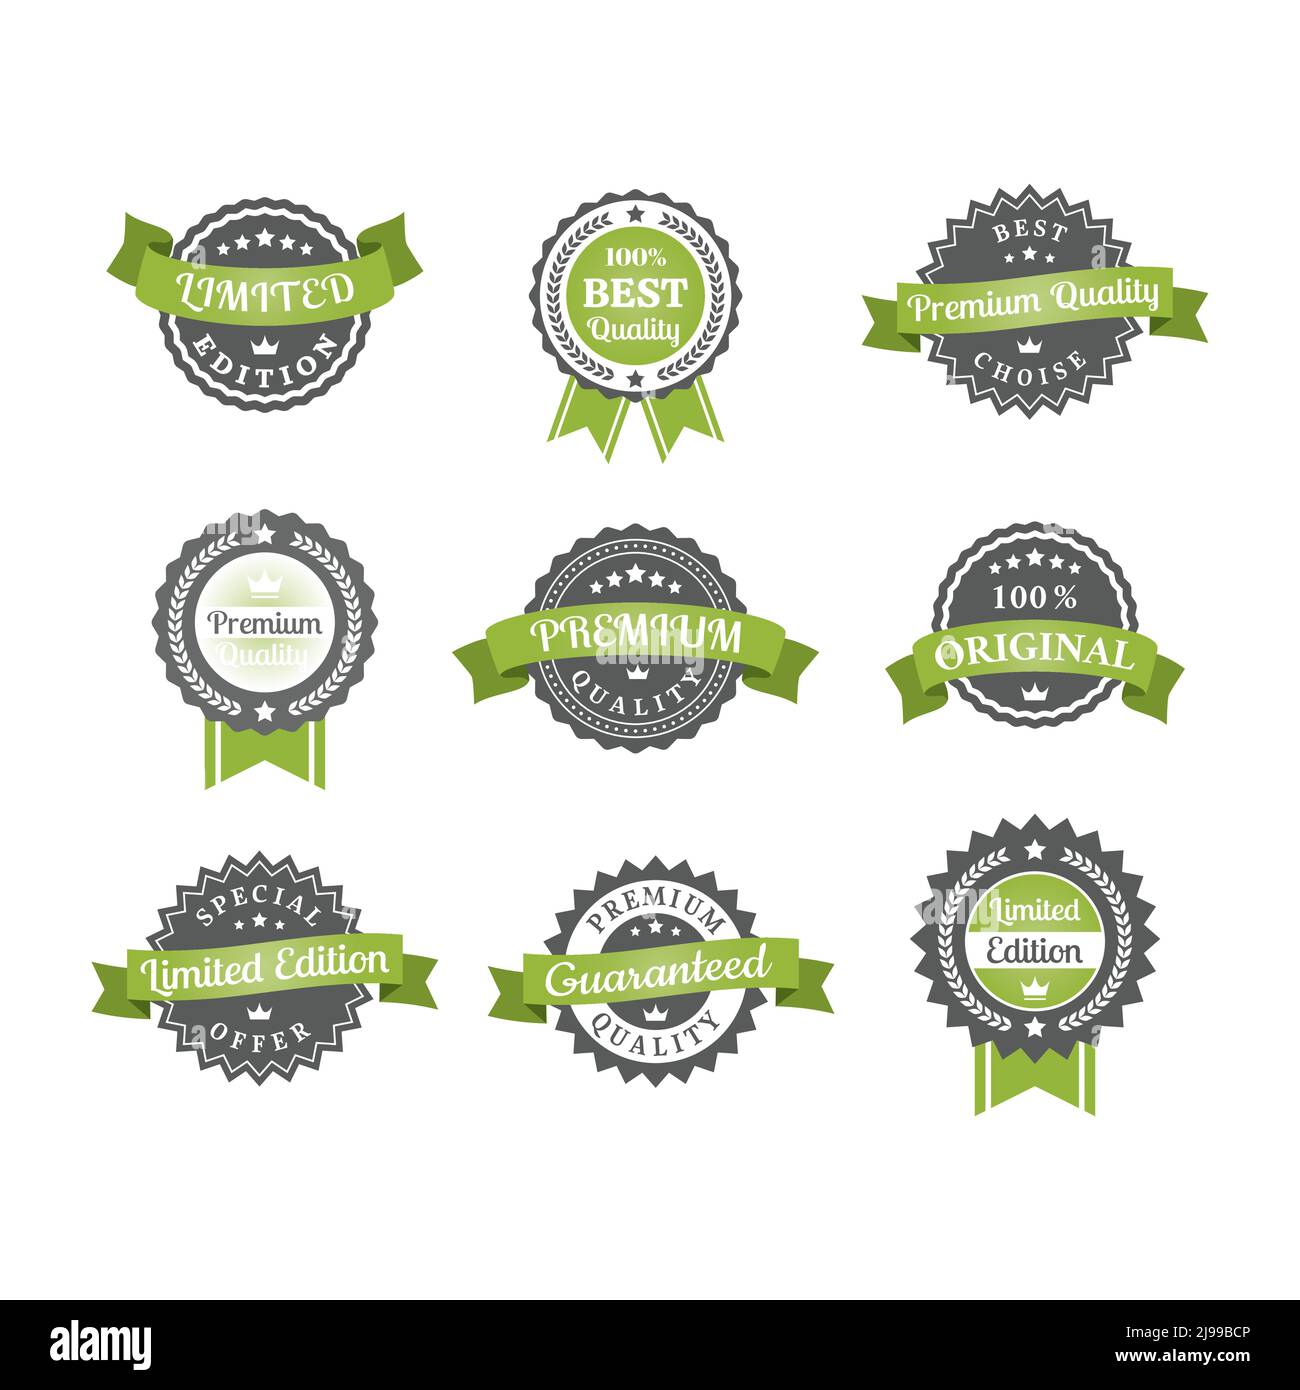 Premium quality and limited edition label set. Original product, best choice vector ribbon banner badges. Stock Vector